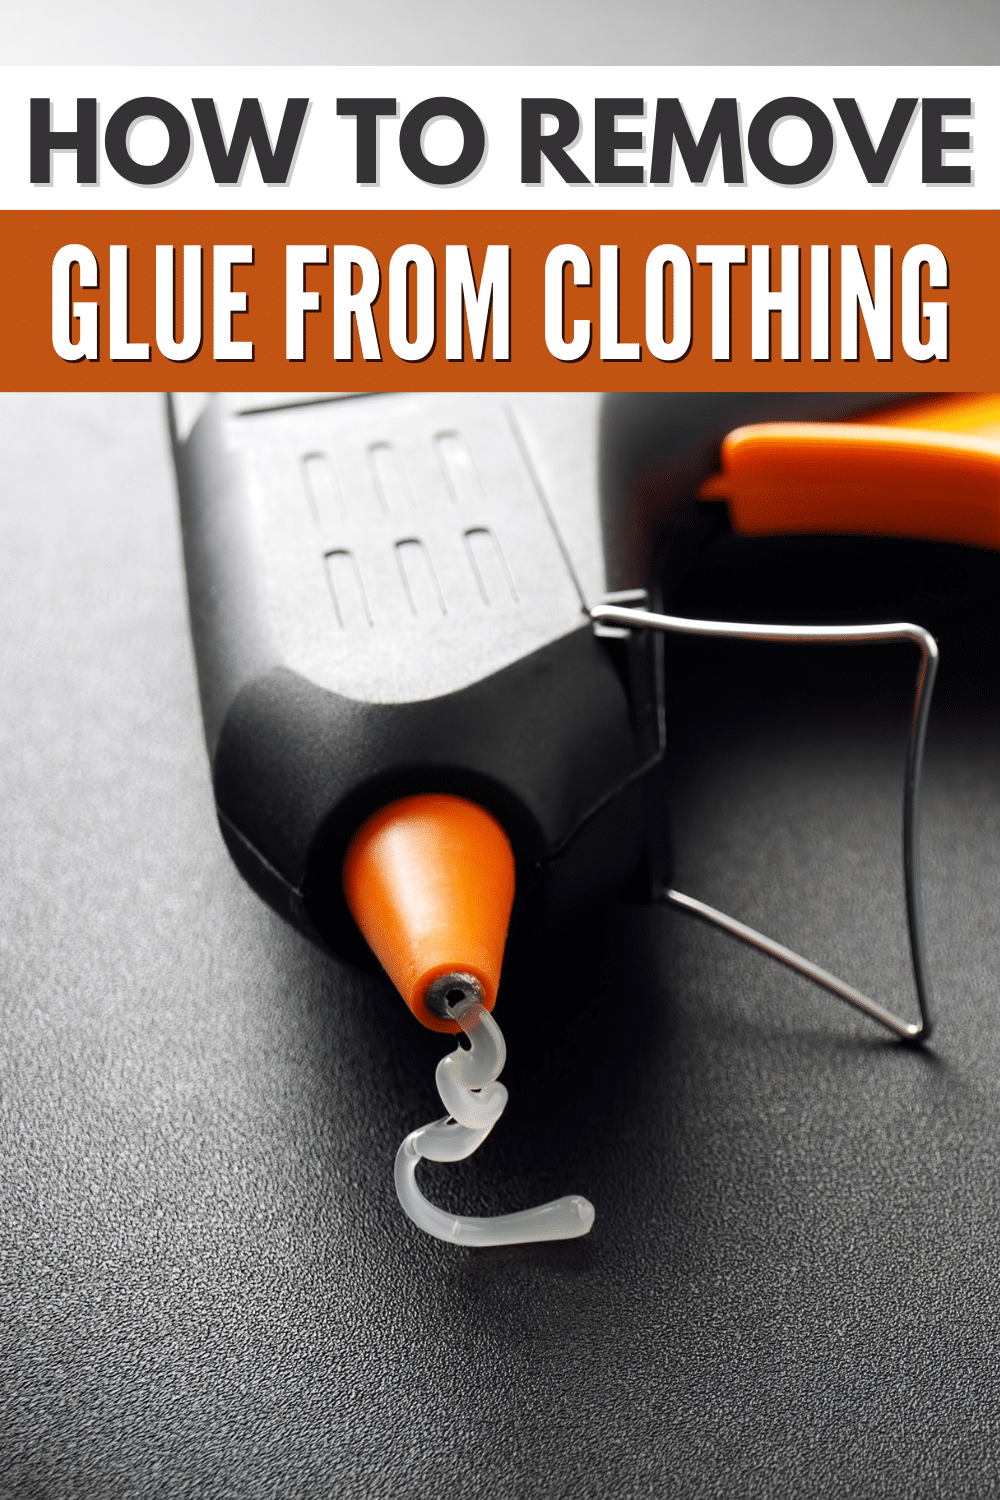 A guide on removing glue from clothing.